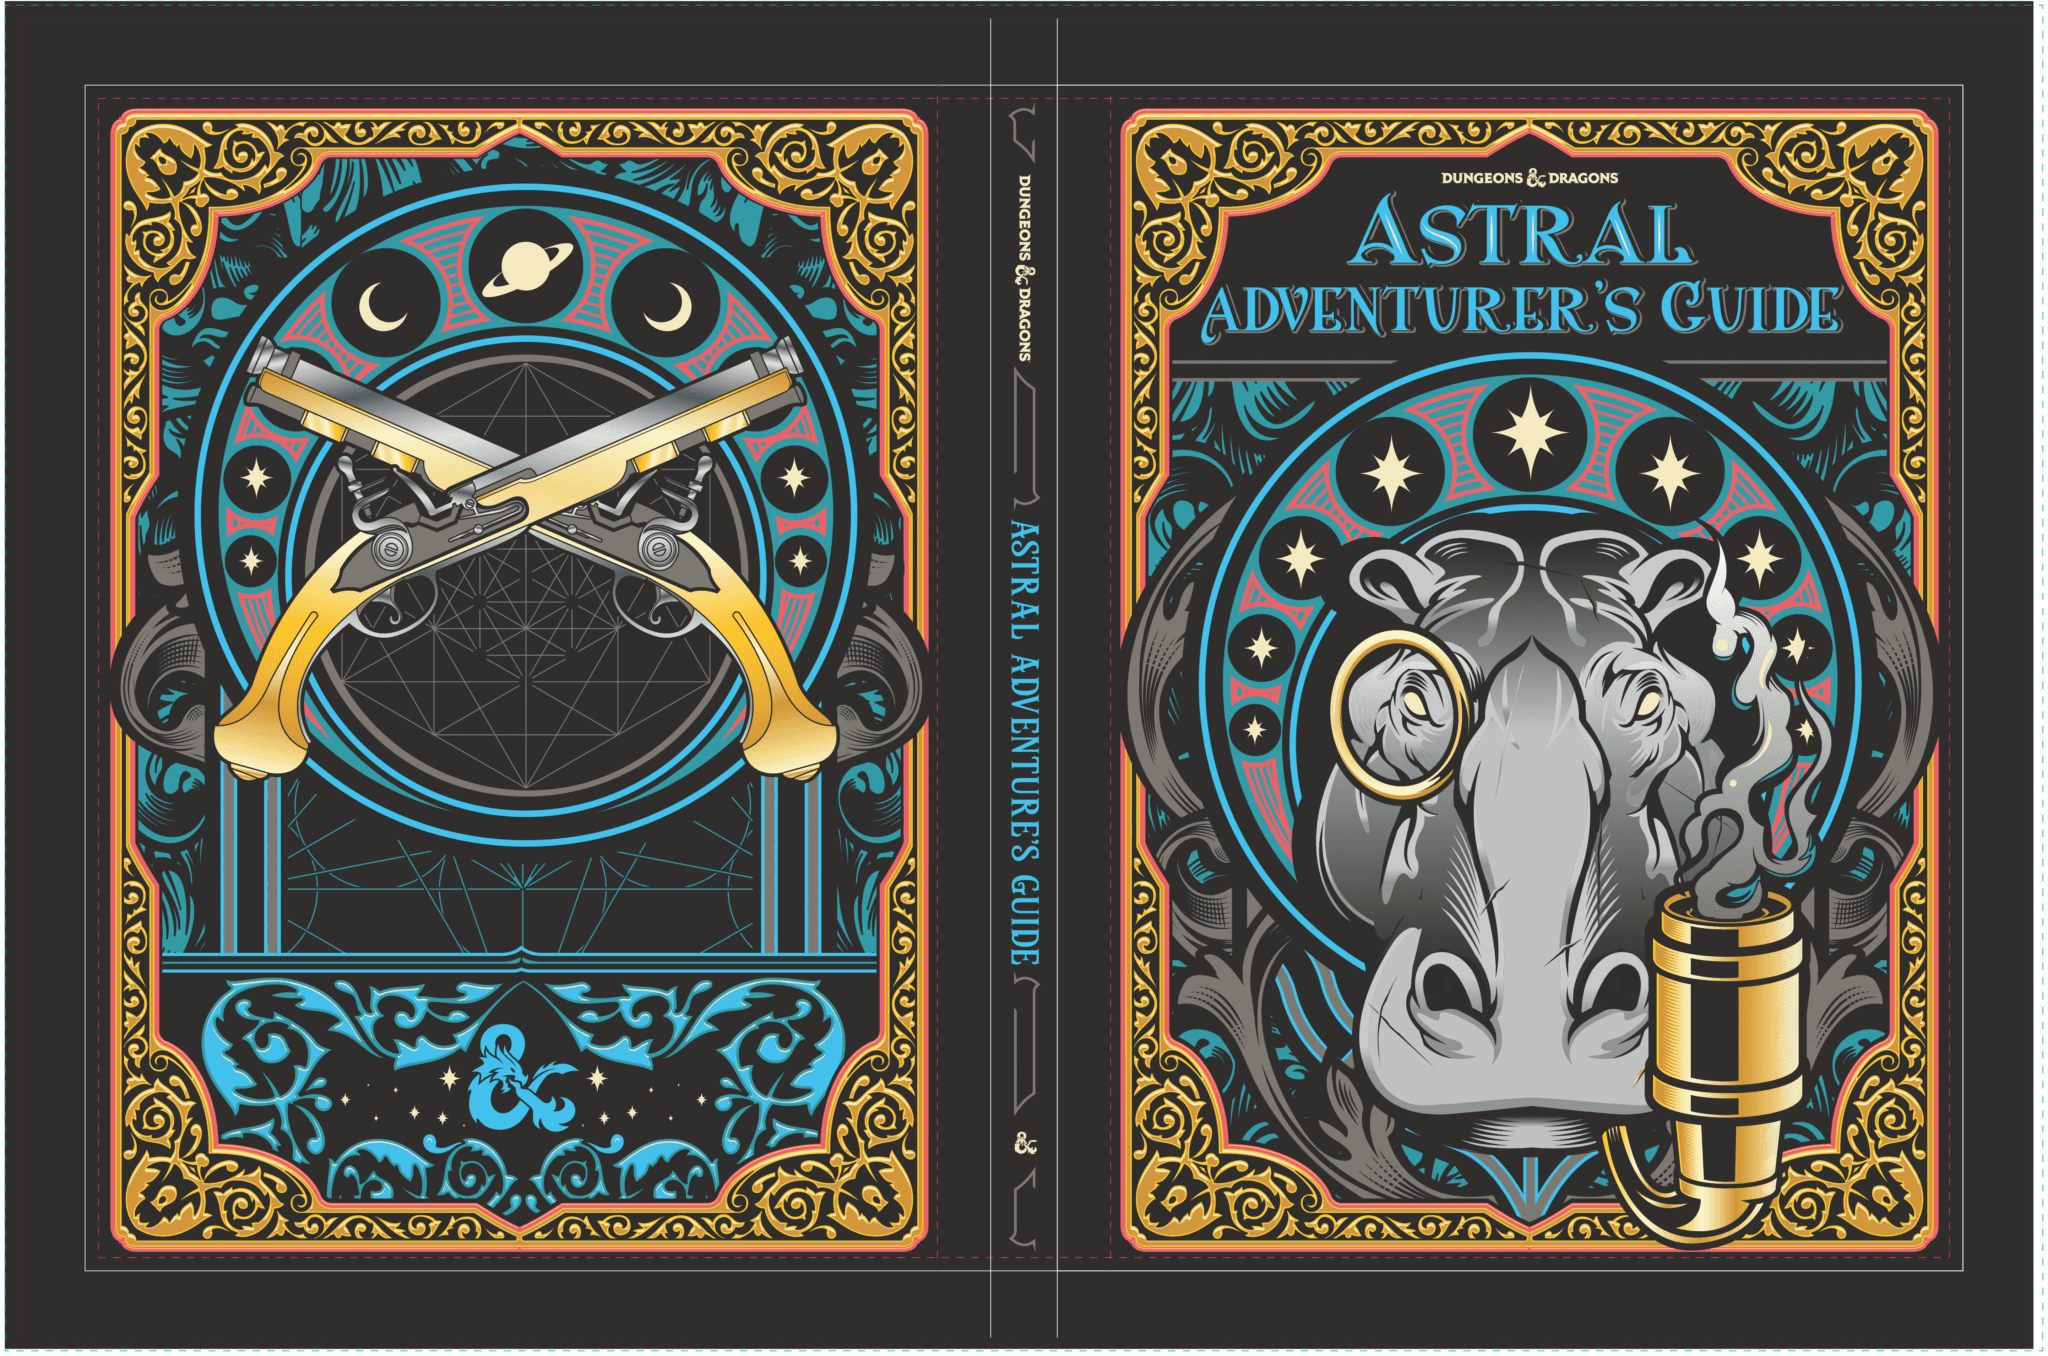 Astral Adventurer's Guide Alt-cover by Hydro74